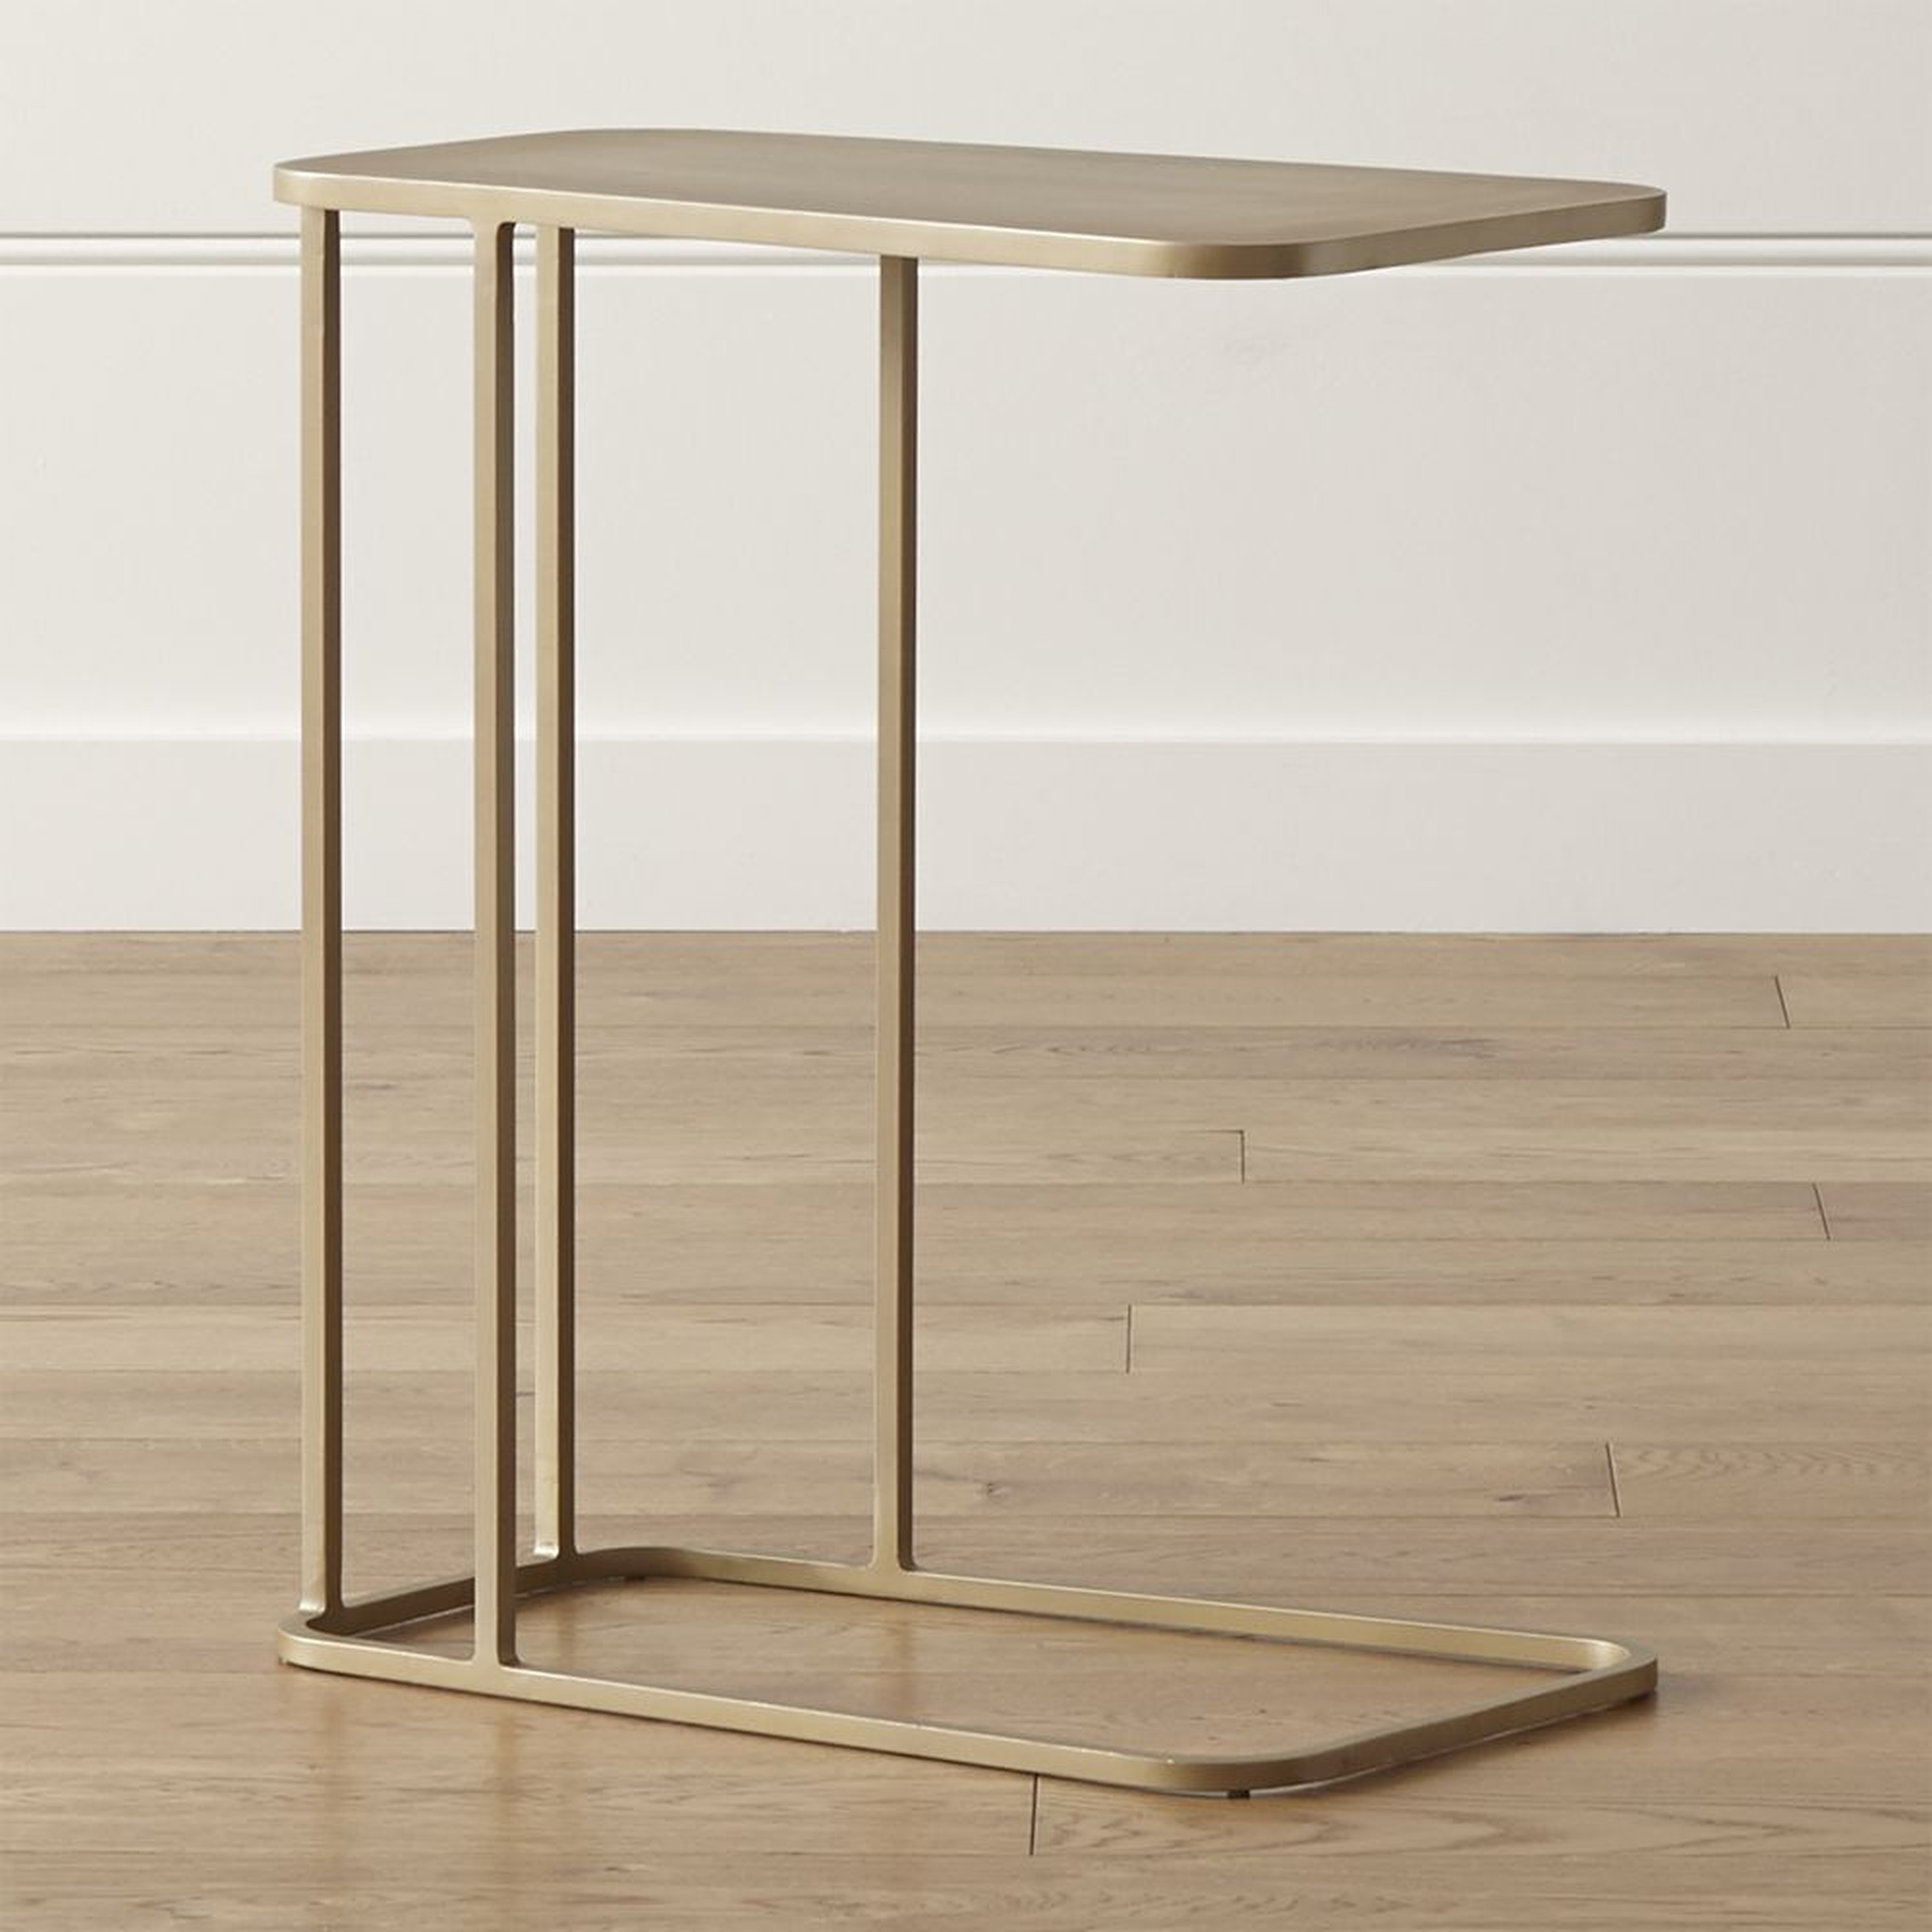 Siena C Table - Crate and Barrel